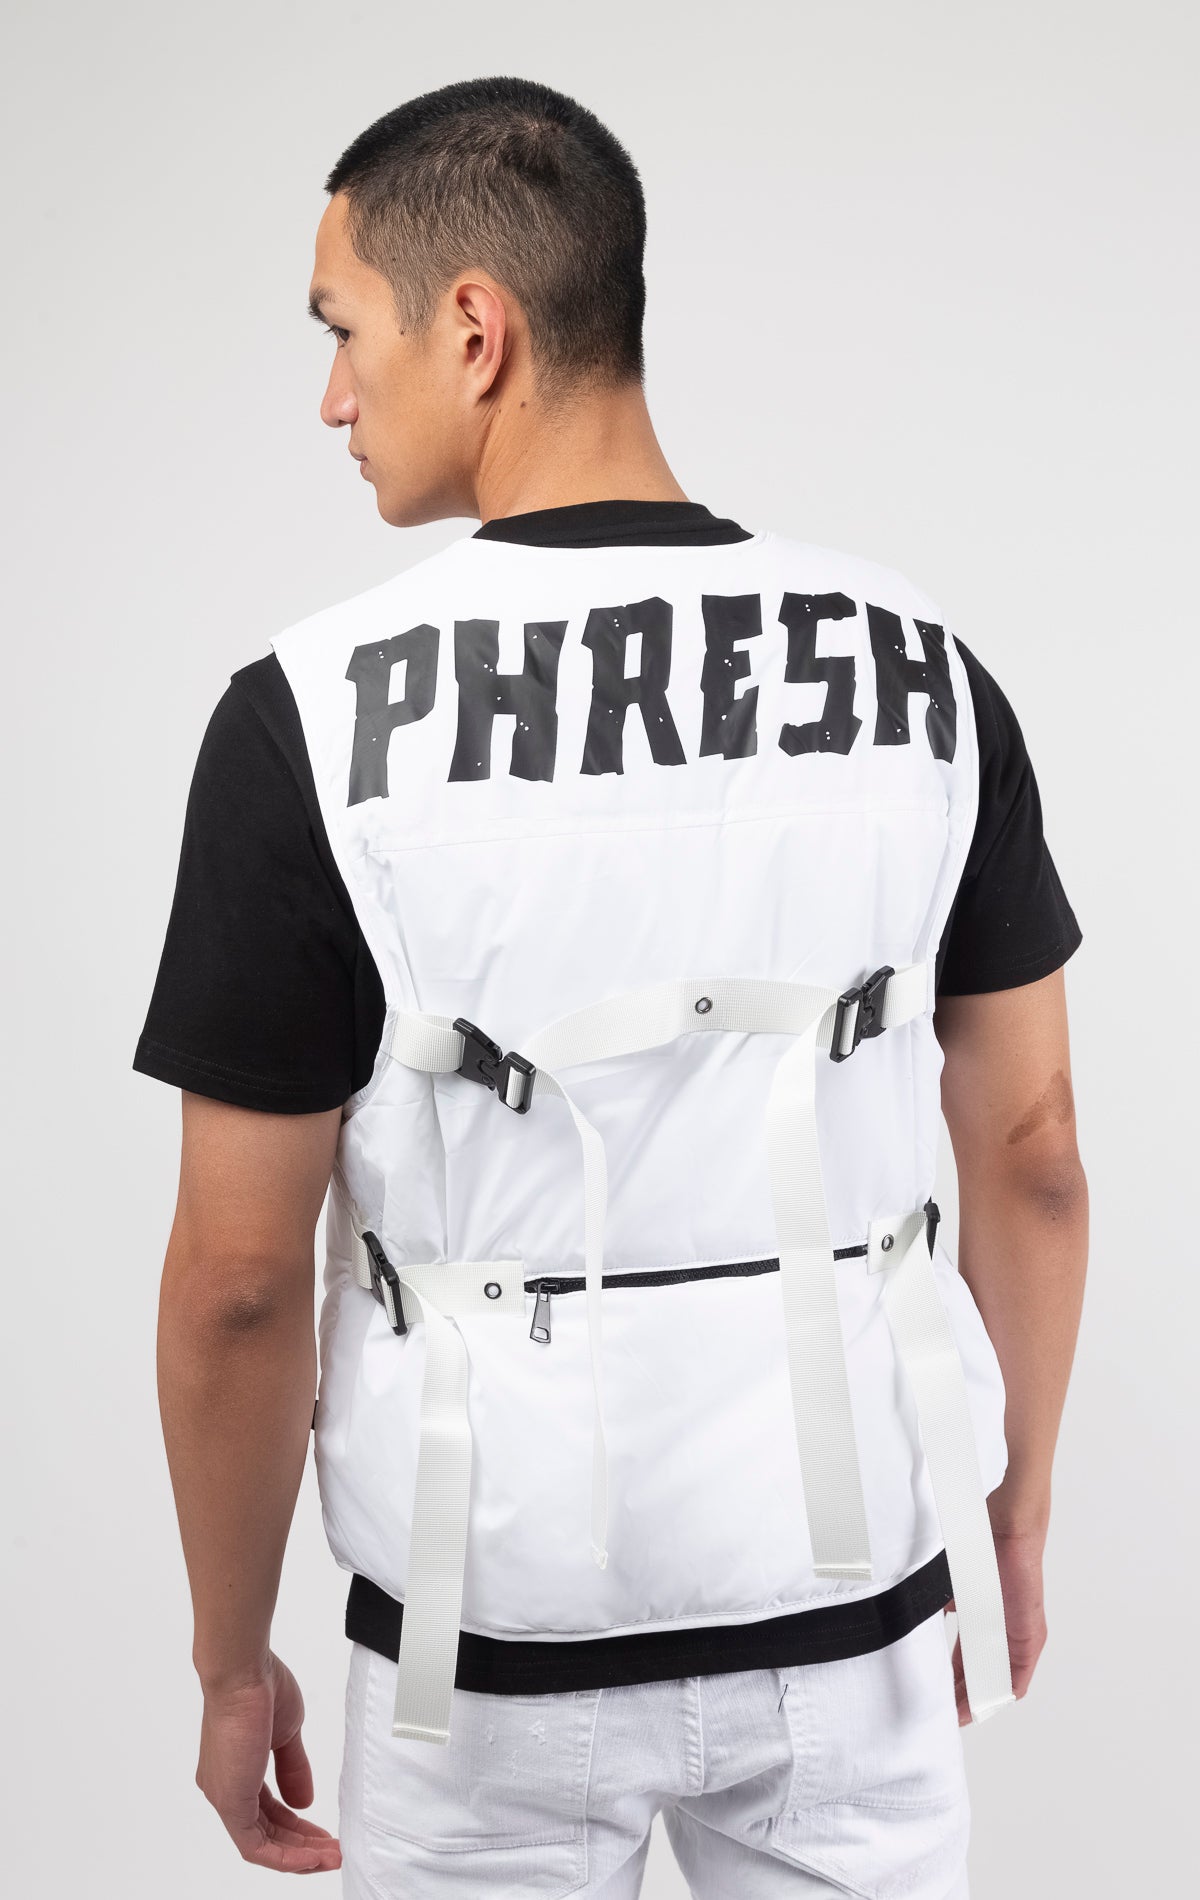 White Premium Cire Padded Vest with 2oz of padding, adjustable straps, and functional front and back pockets. Back features a PHRESH(FRESH) screen print, while the front showcases a Love to Kleep logo and clear rubber patch.